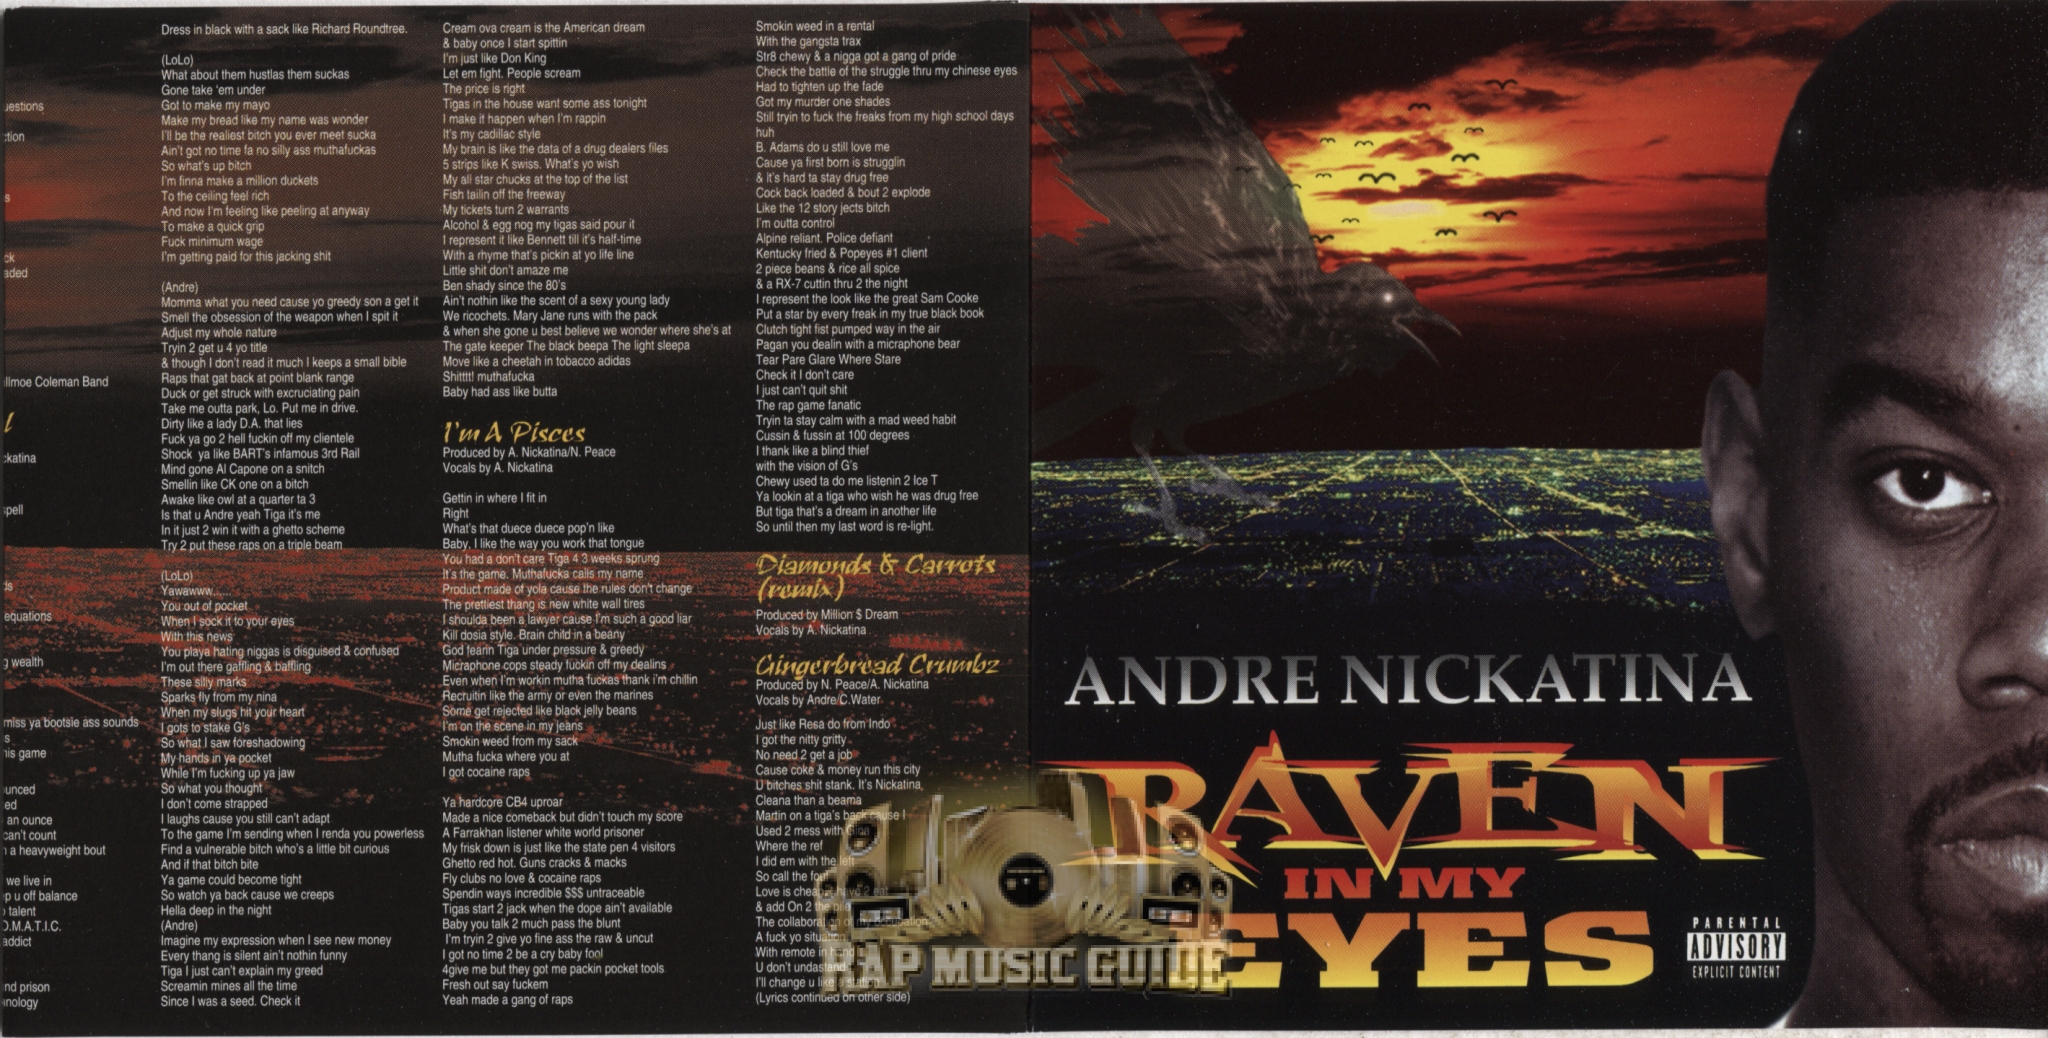 Andre Nickatina - Raven In My Eyes: 1st Press. CD | Rap Music Guide